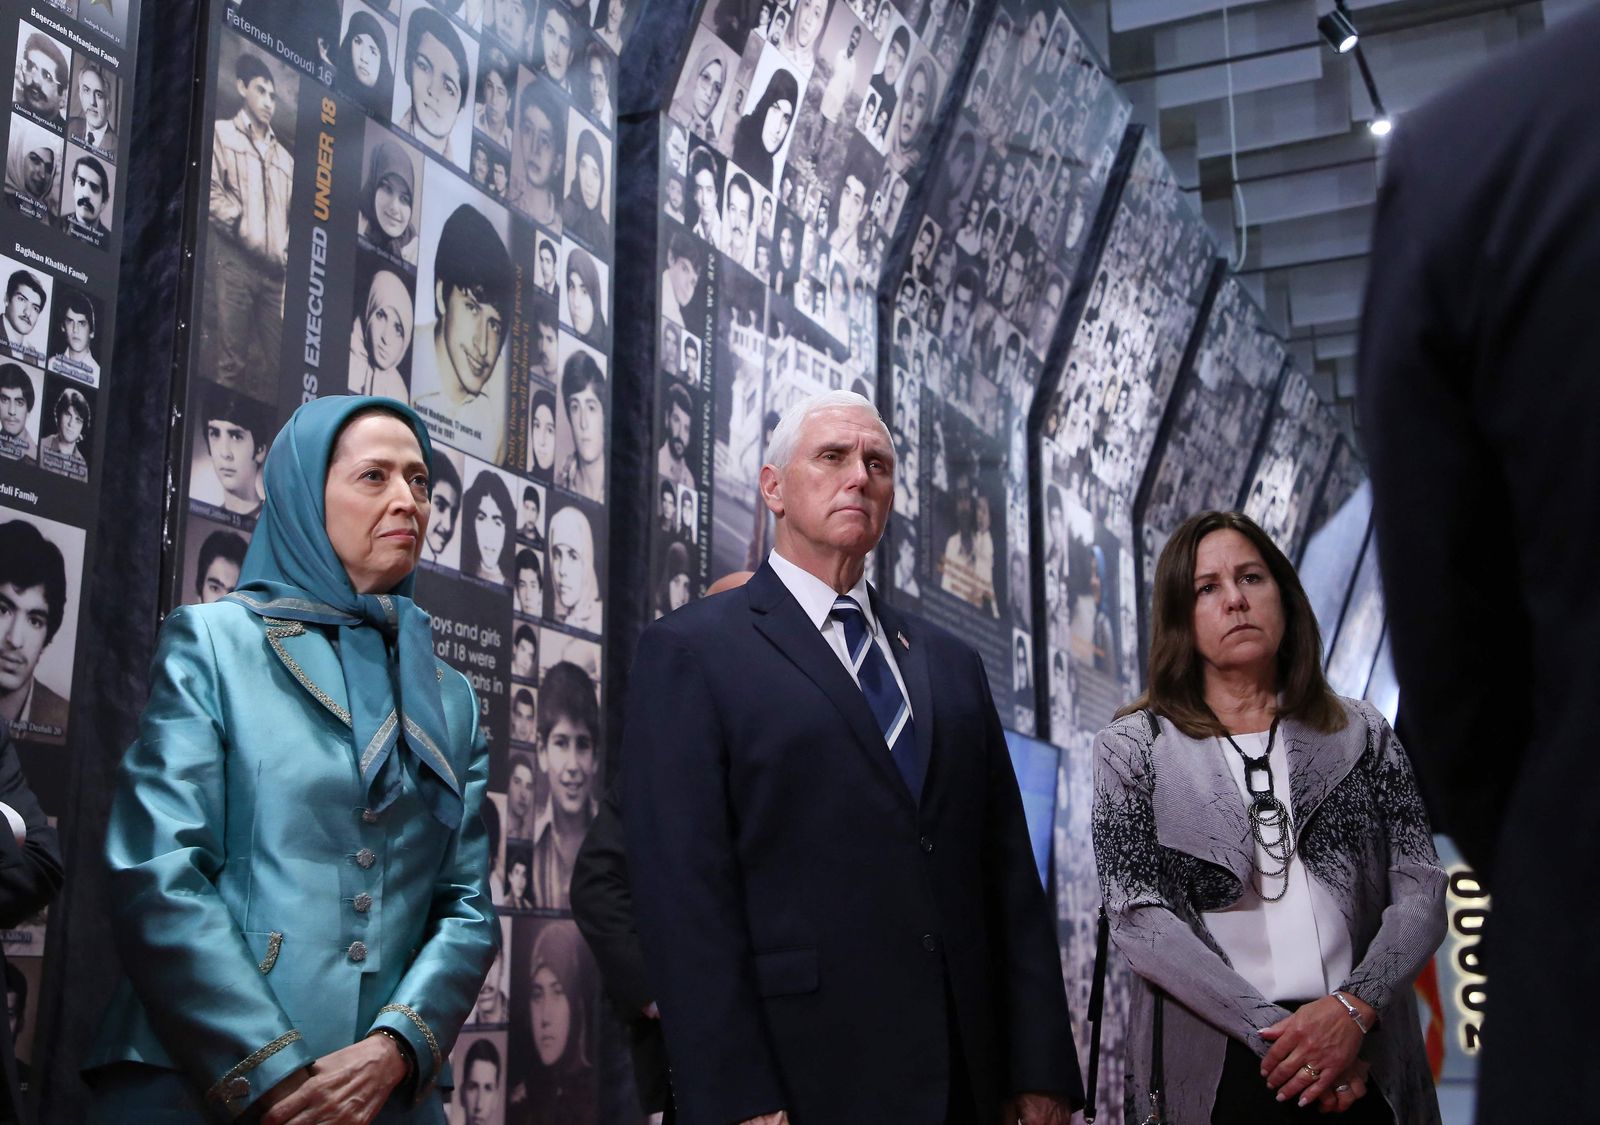 Leader of the People's Mujahedin of Iran Maryam Rajavi (L), former US Vice President  Mike Pence (C) and his wife Karen Pence (R) visit an exhibition inside of Ashraf-3 camp,  a base for the People's Mojahedin Organization of Iran (MEK) in the Albanian town of Manza, on June 23, 2022. (Photo by Gent SHKULLAKU / AFP) - AFP